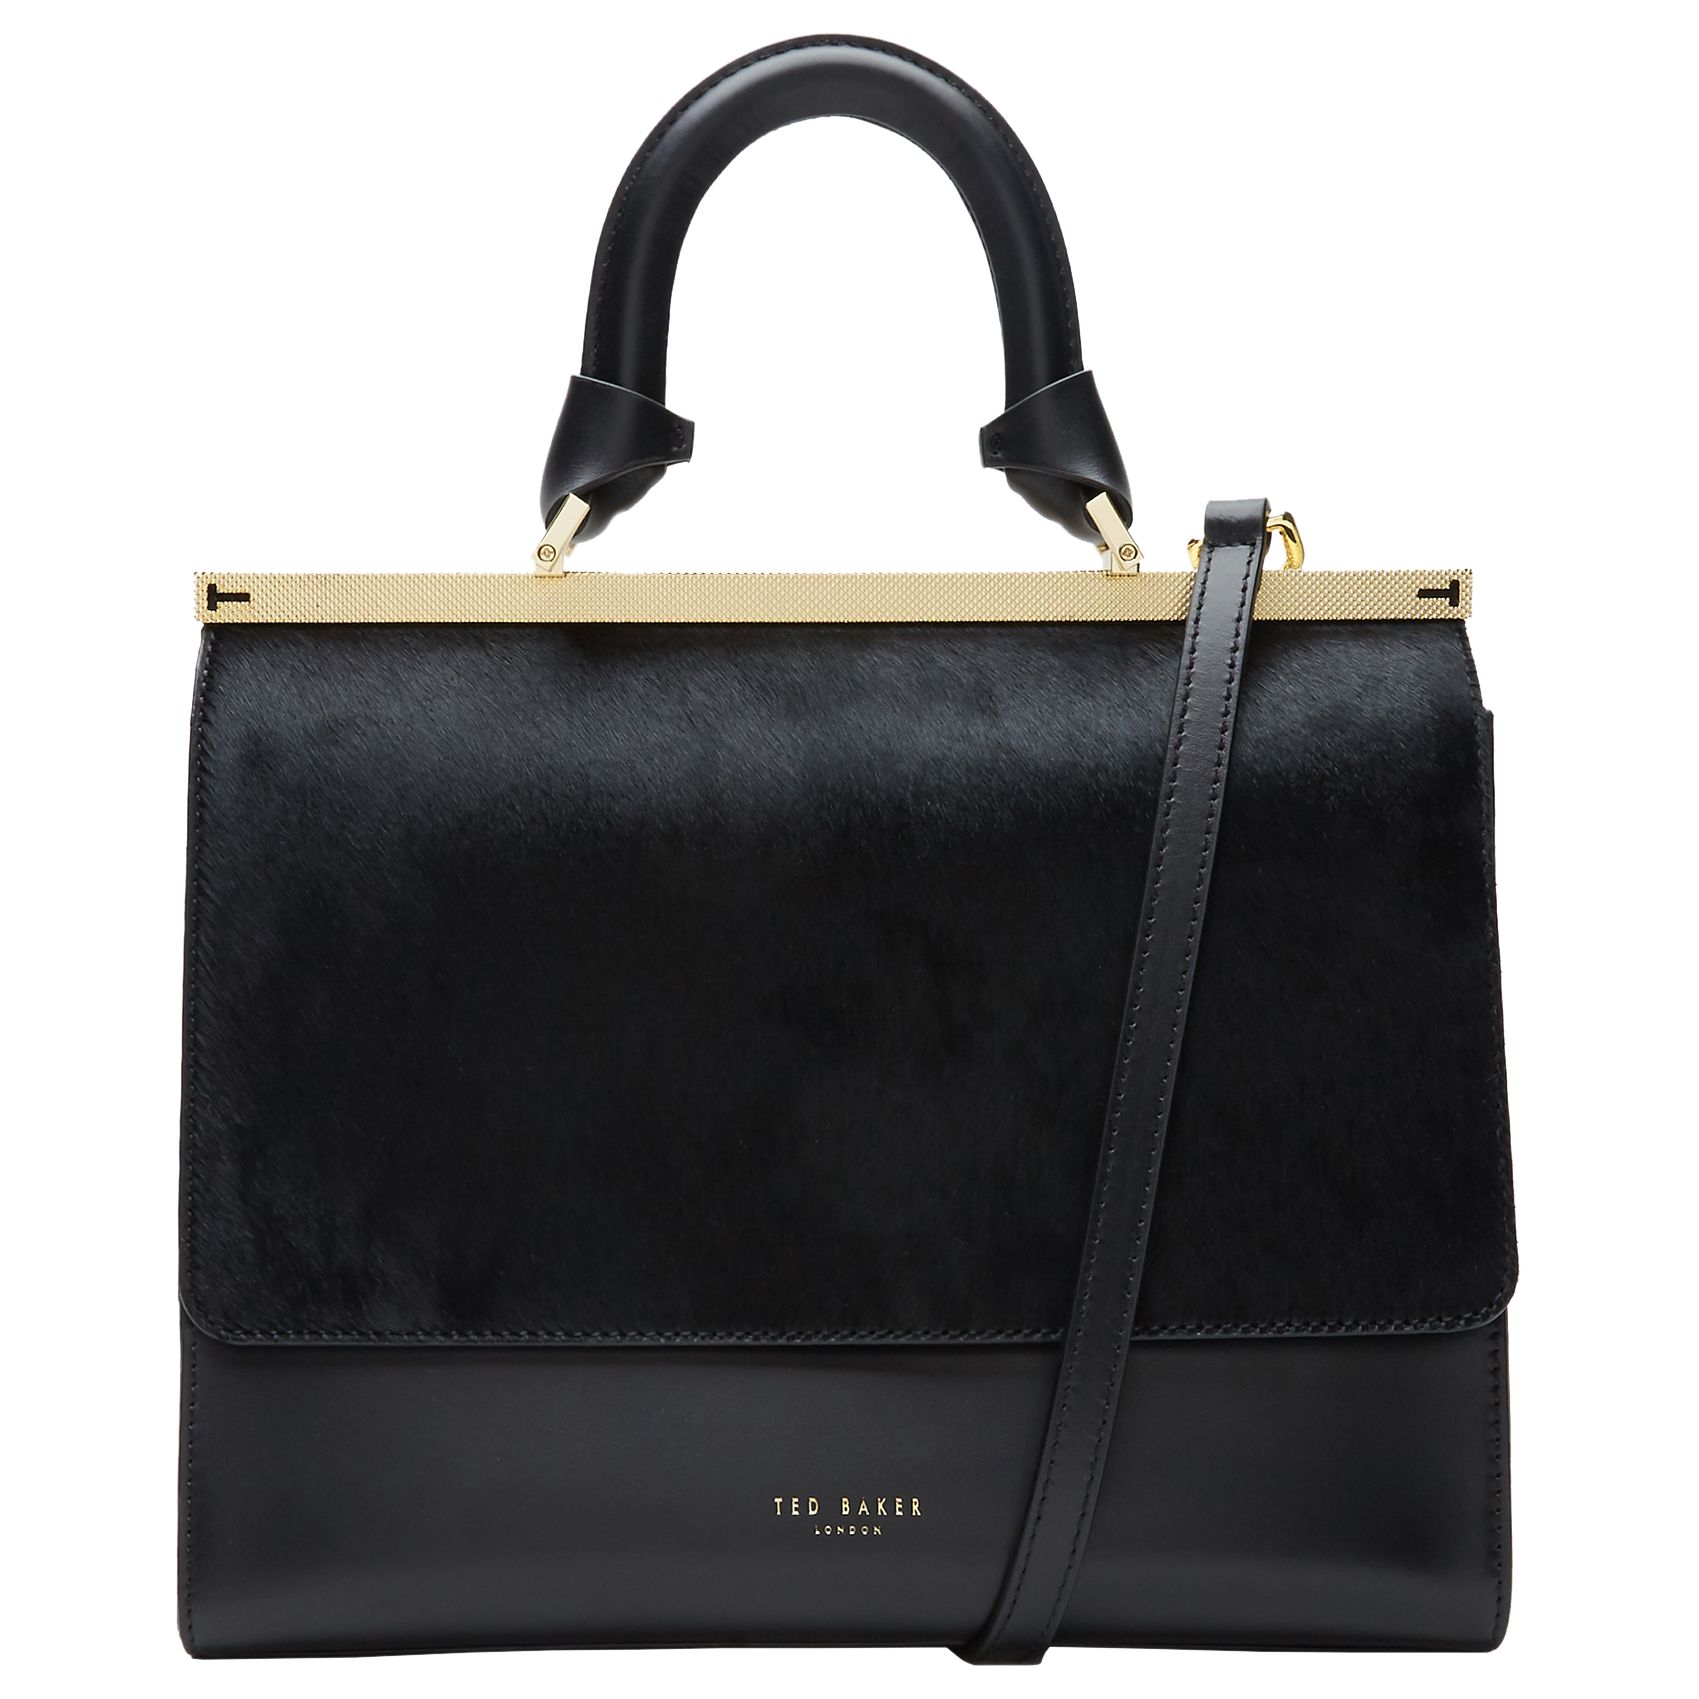 Ted Baker Luci Leather Top Handle Tote Bag, Black